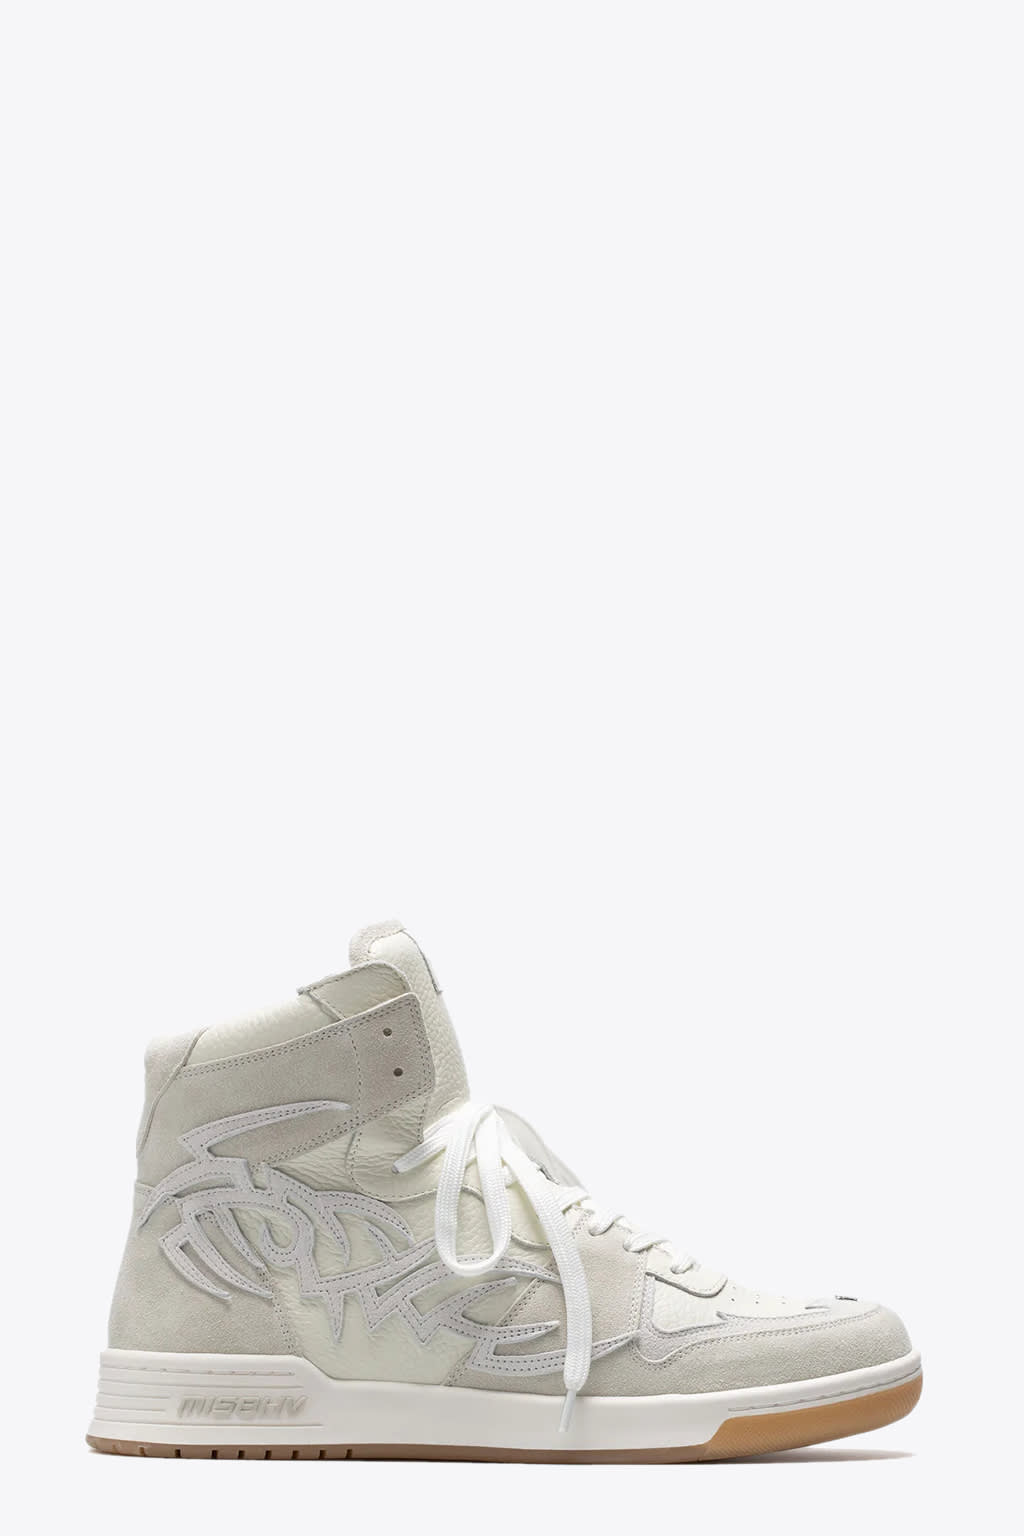 MISBHV COURT SNEAKER OFF-WHITE LEATHER AND SUEDE HIGH SNEAKER - COURT SNEAKER